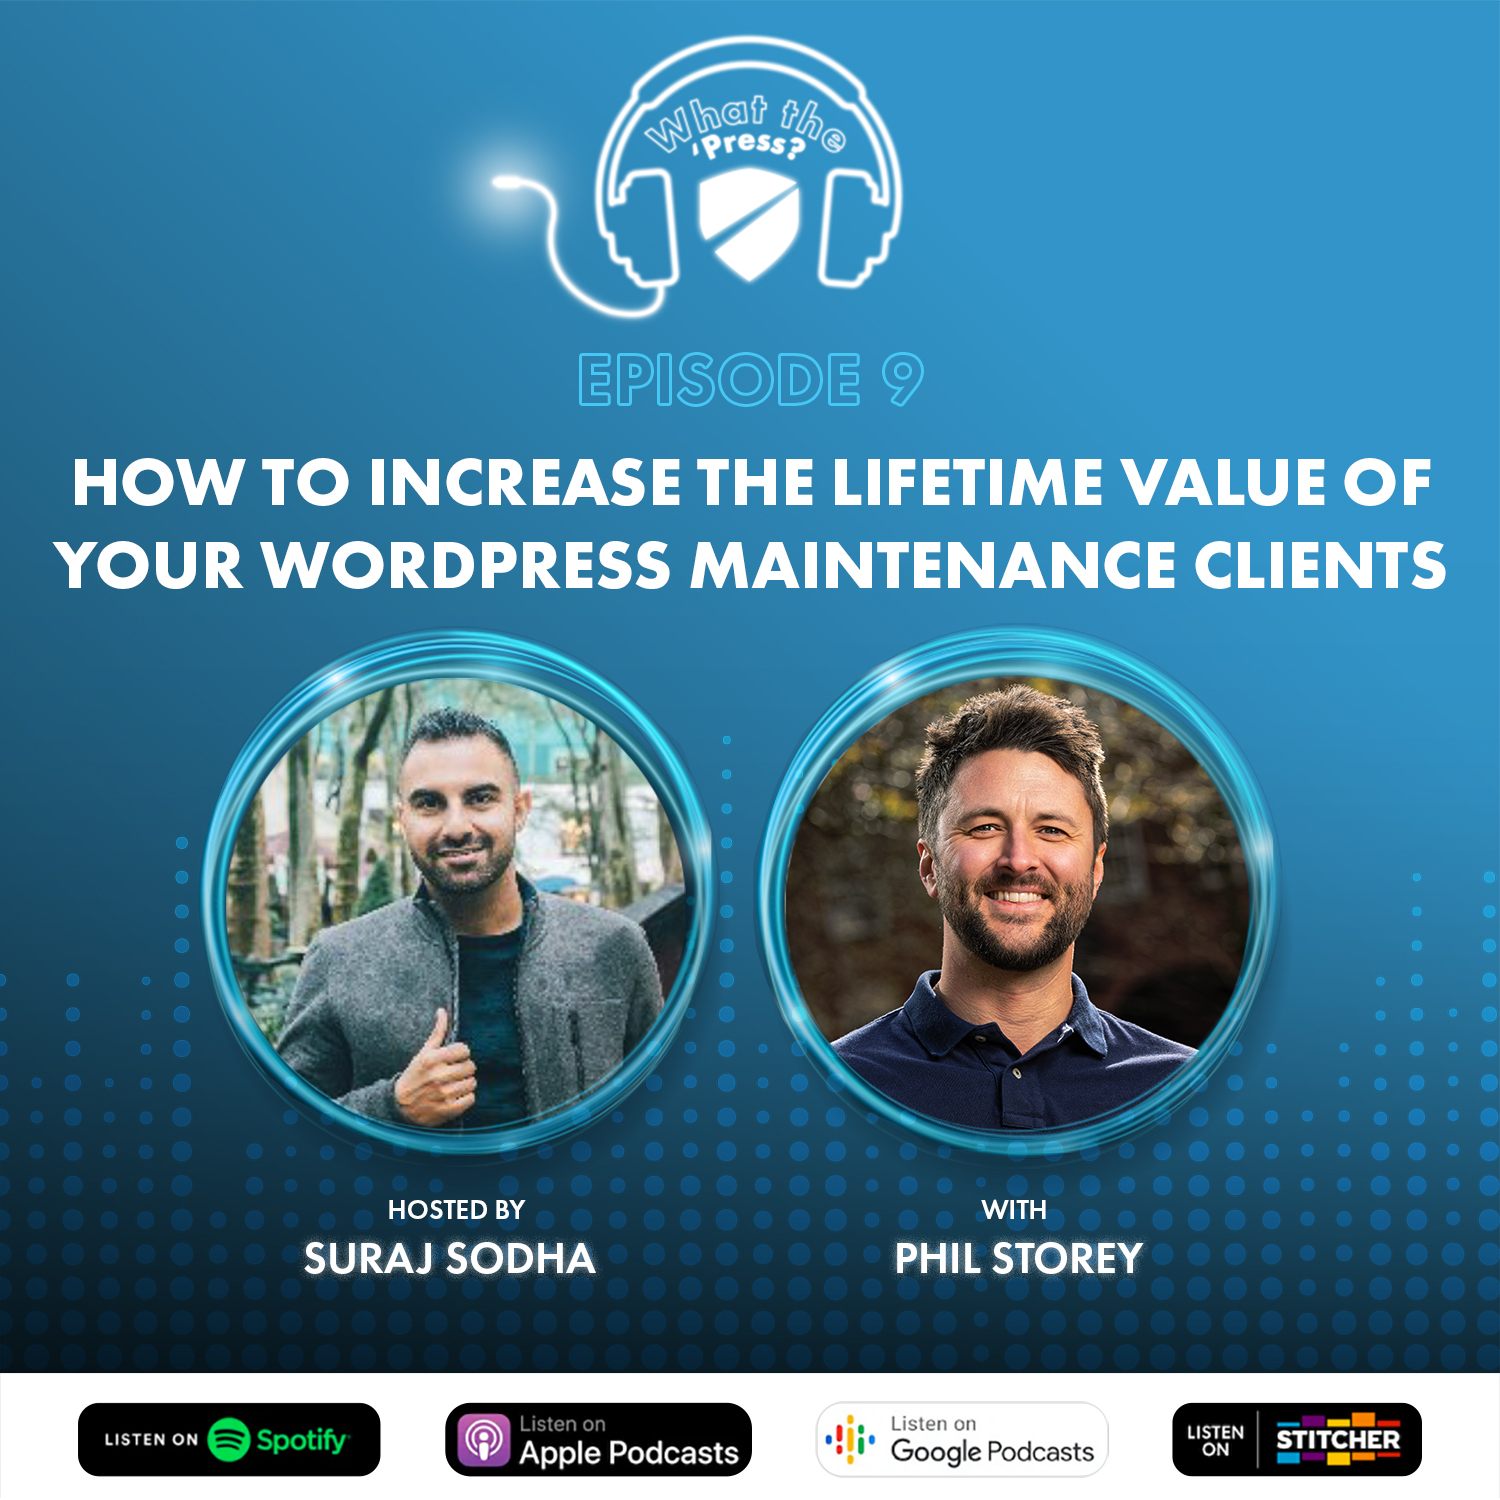 Ep.9: How to increase the lifetime value of your WordPress maintenance clients